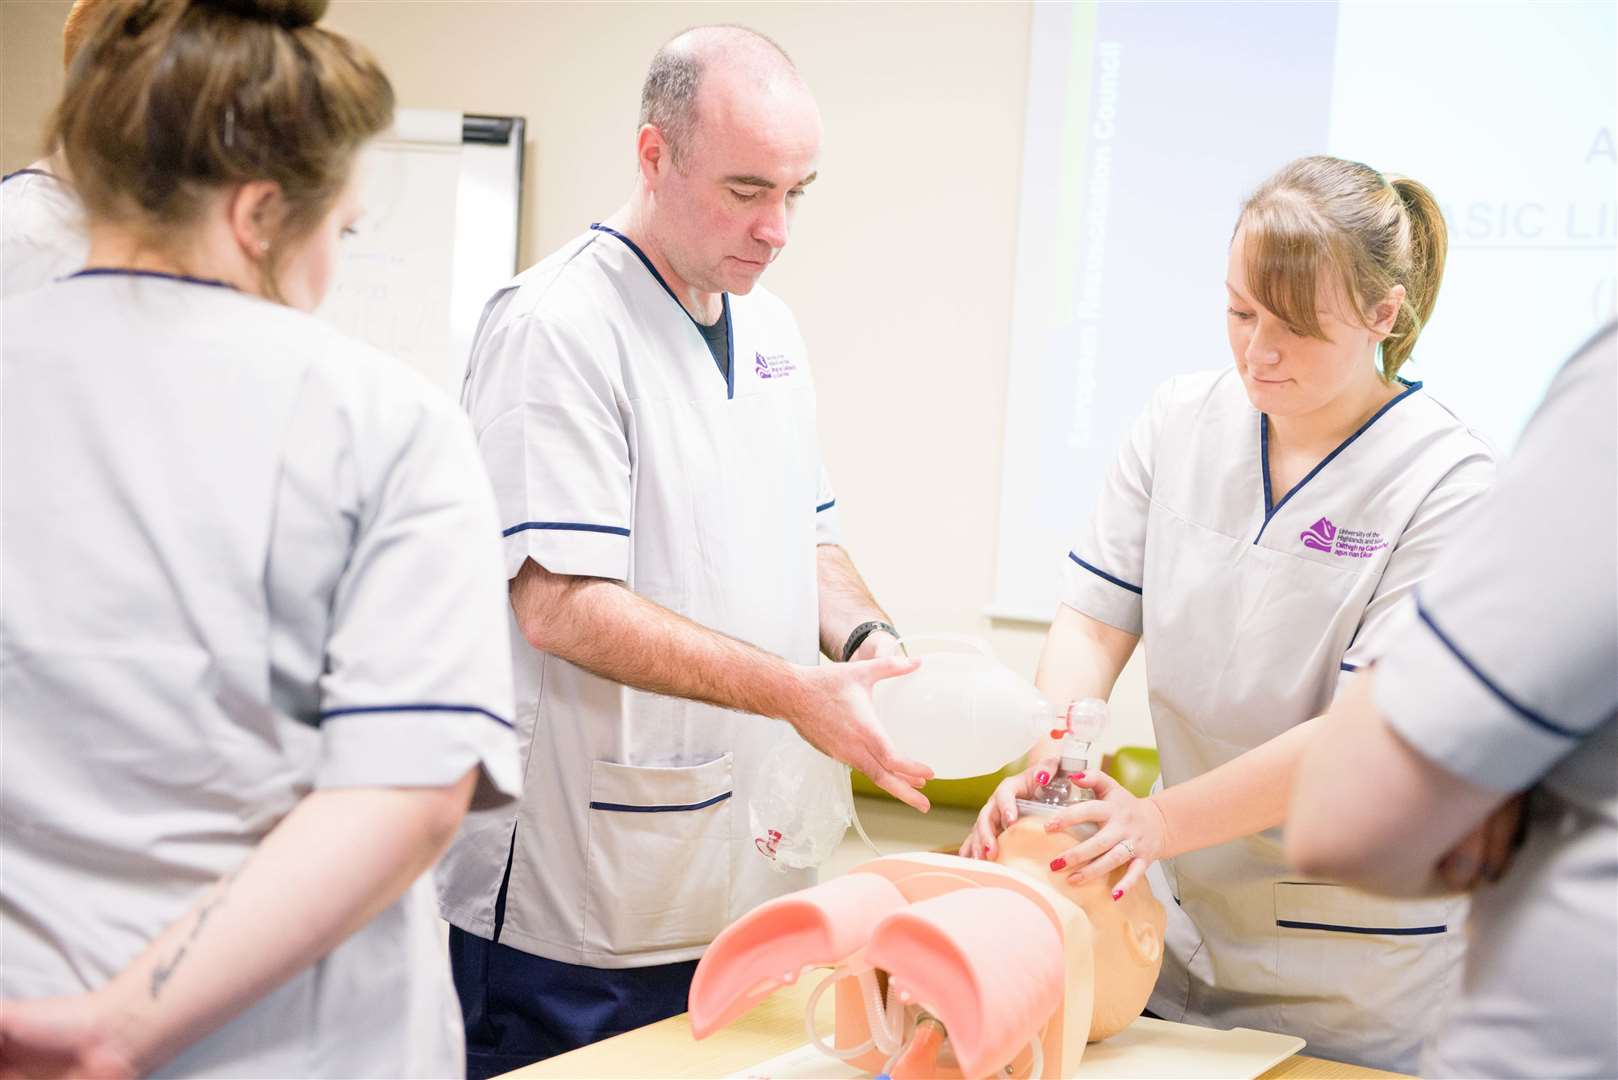 Student nurses are being drafted in to the NHS frontline.